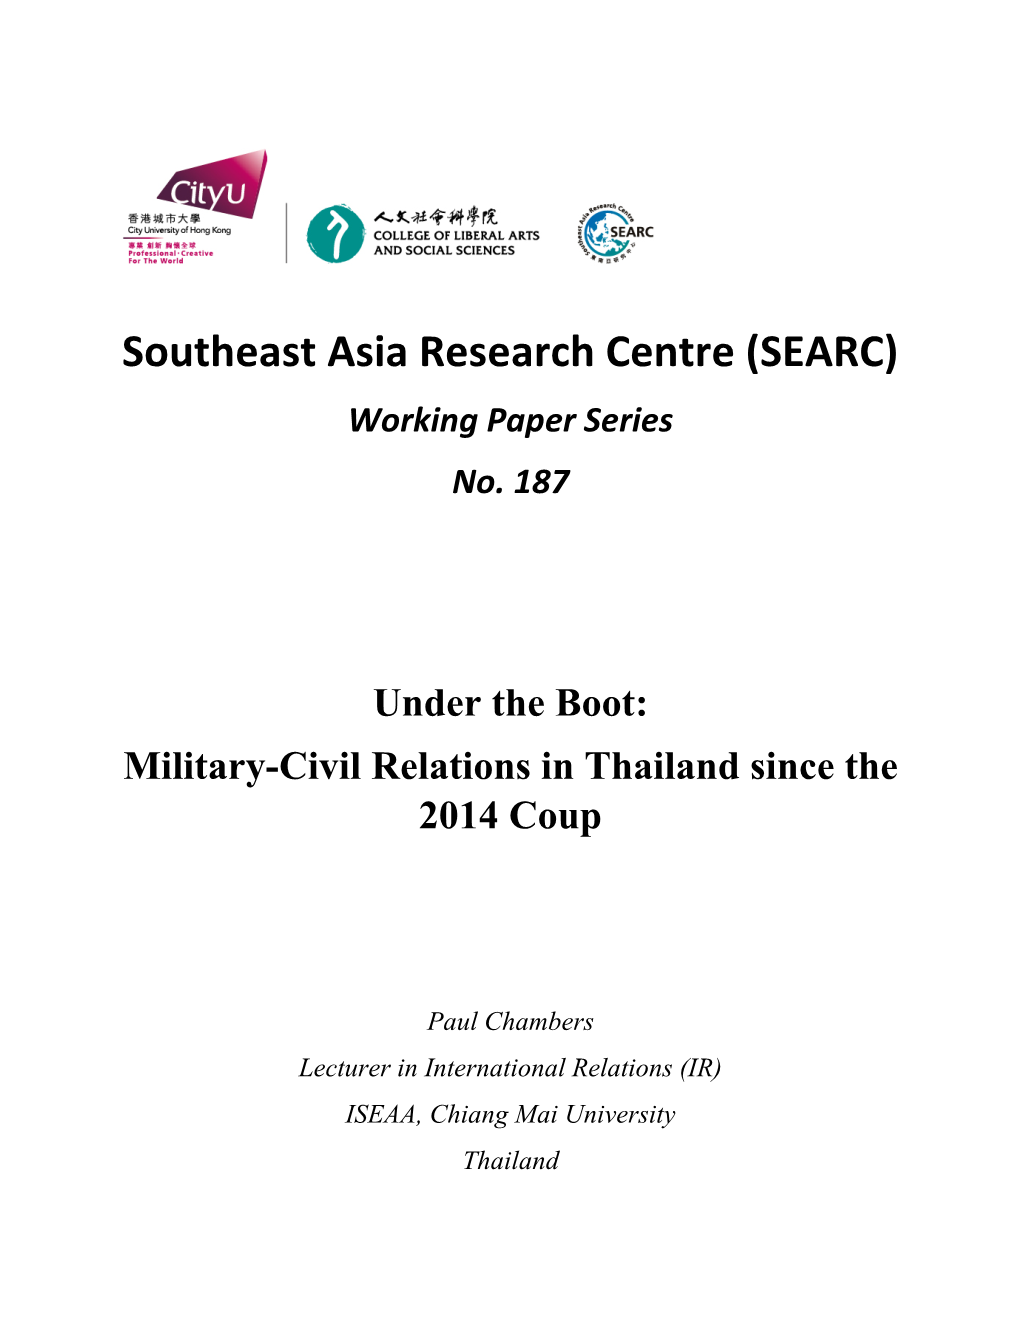 Search Centre (SEARC) Working Paper Series No